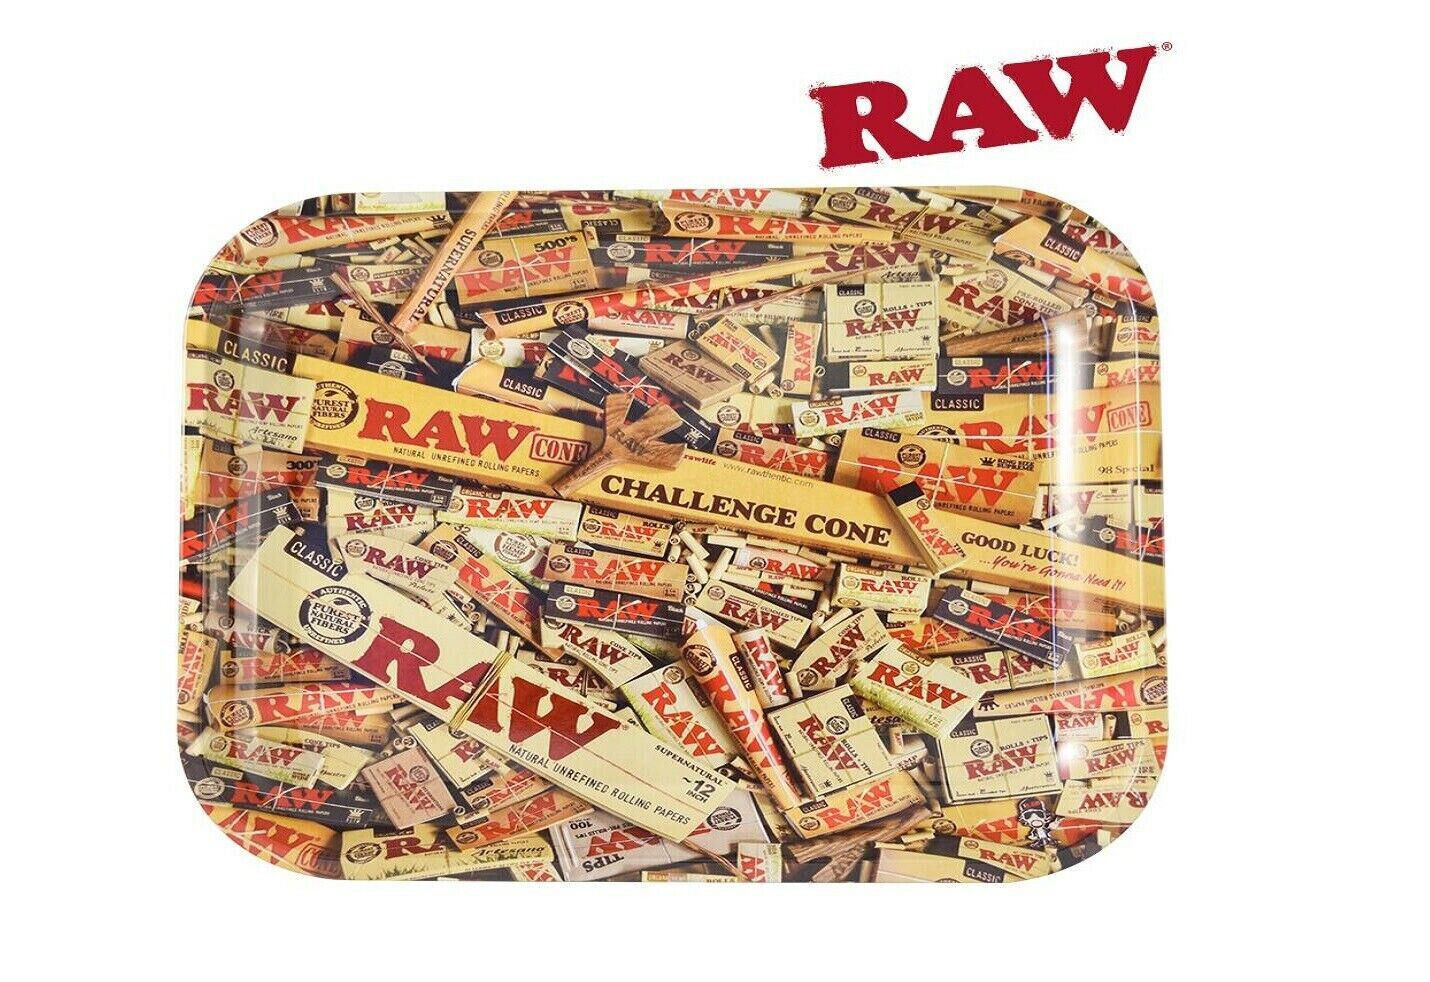 Premium RAW Collage Rolling Metal Tray Cigarette Tobacco Medium Rolling Papers